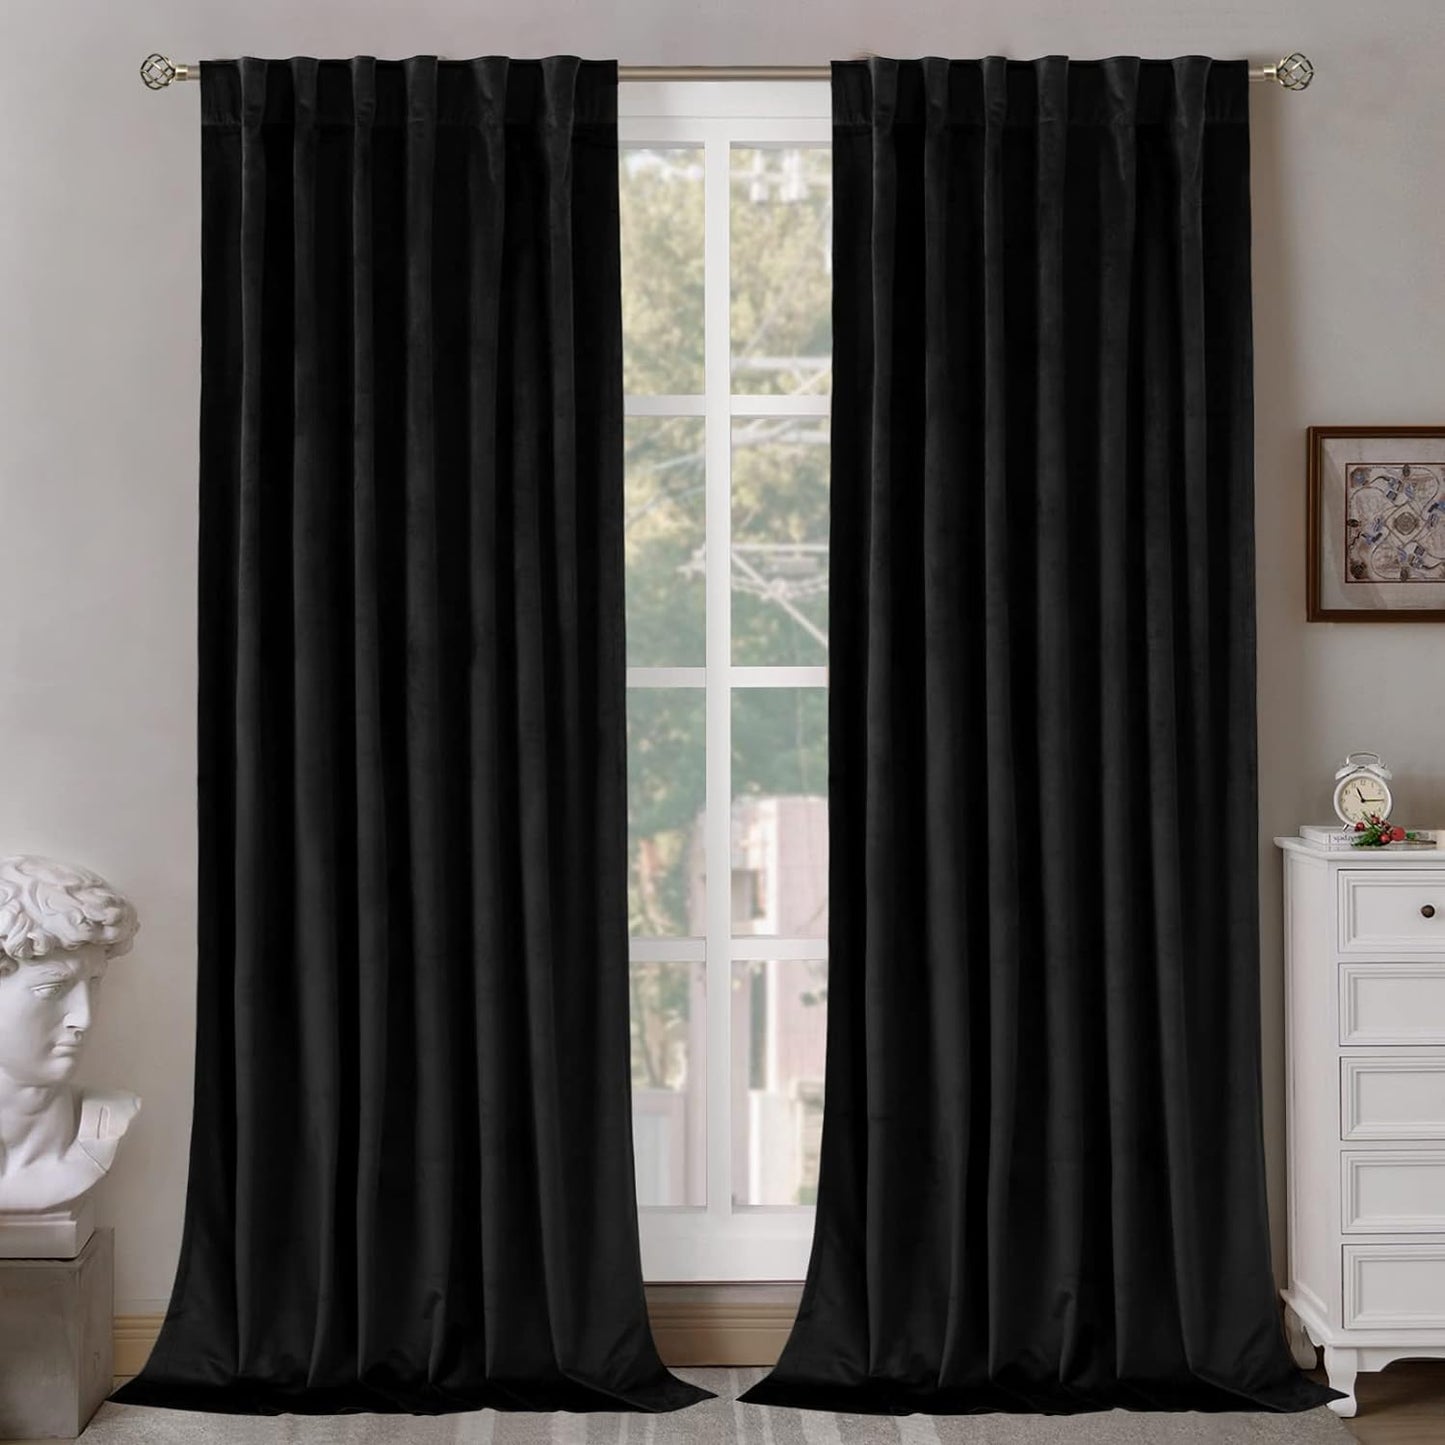 Bgment Grey Velvet Curtains 108 Inches Long for Living Room, Thermal Insulated Room Darkening Curtains Drapes Window Treatment with Back Tab and Rod Pocket, Set of 2 Panels, 52 X 108 Inch  BGment Black 52W X 120L 